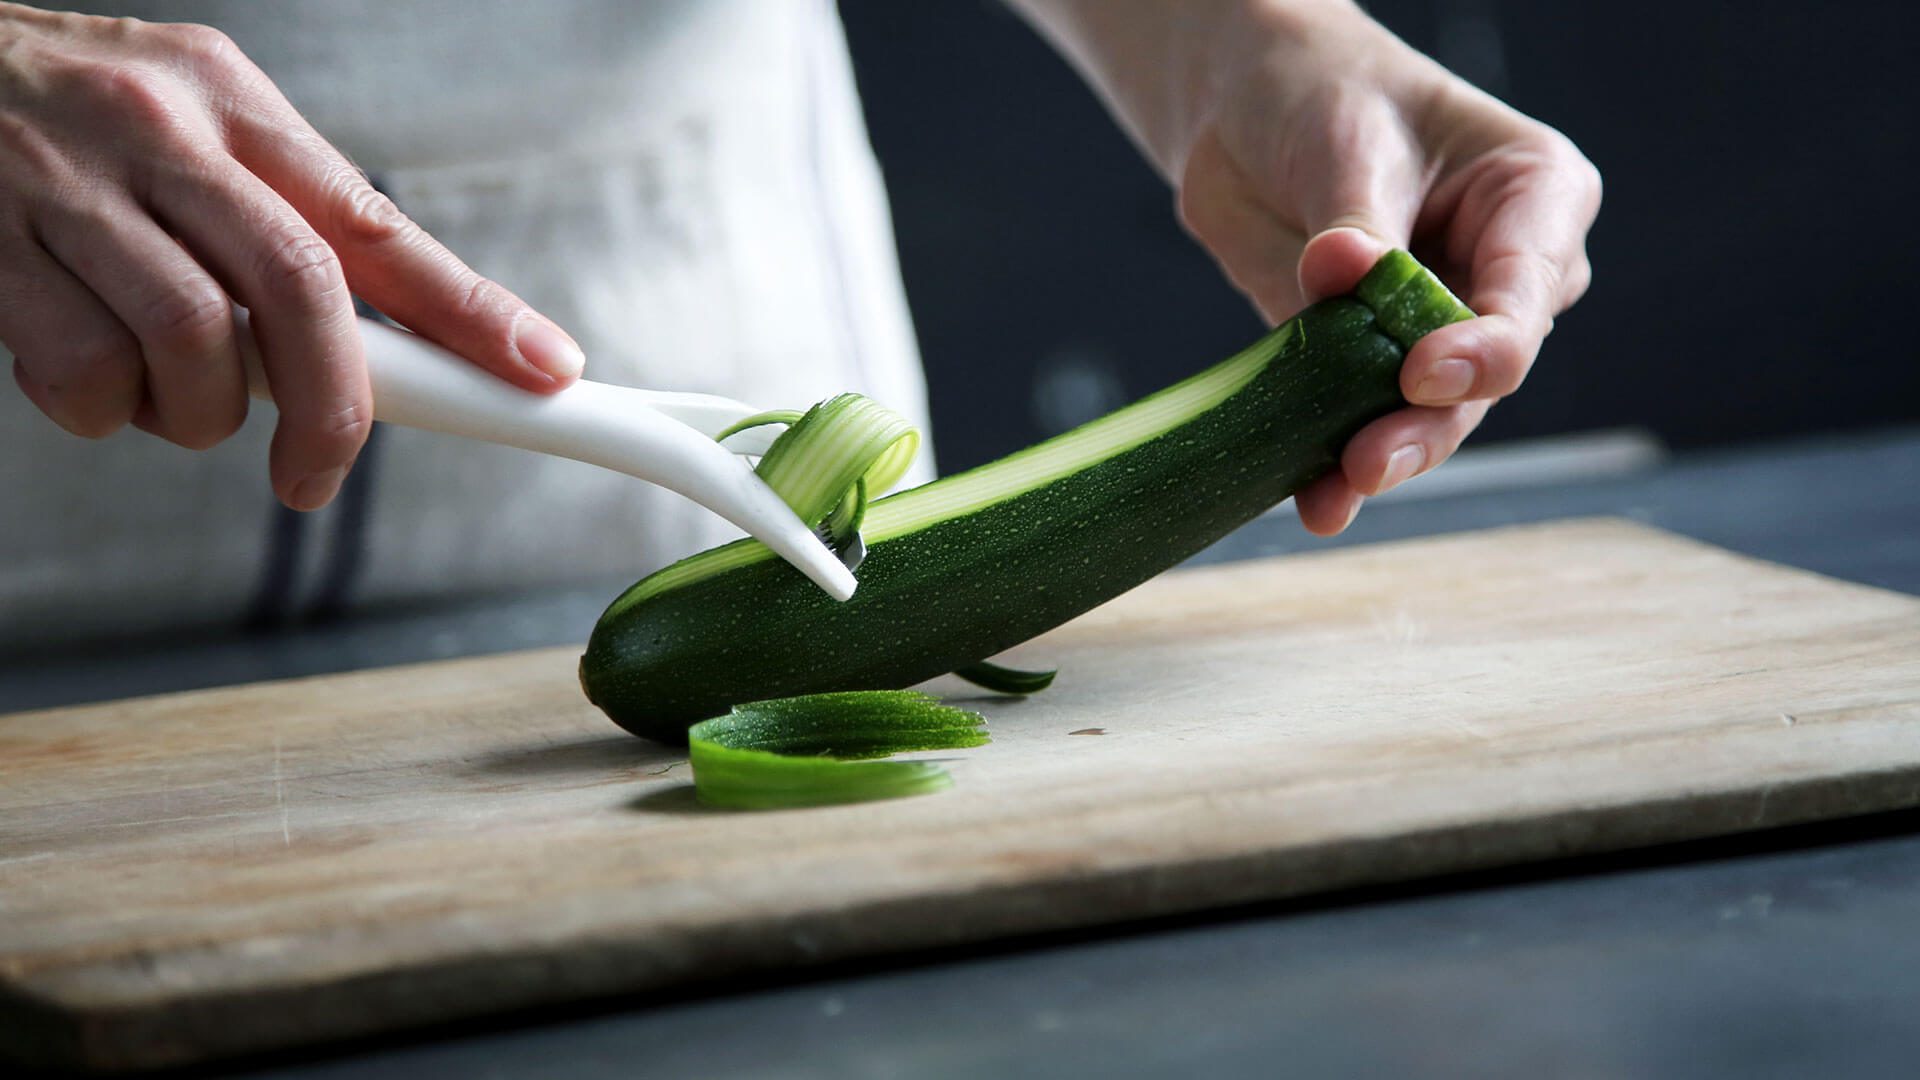 Chef peeling courgette